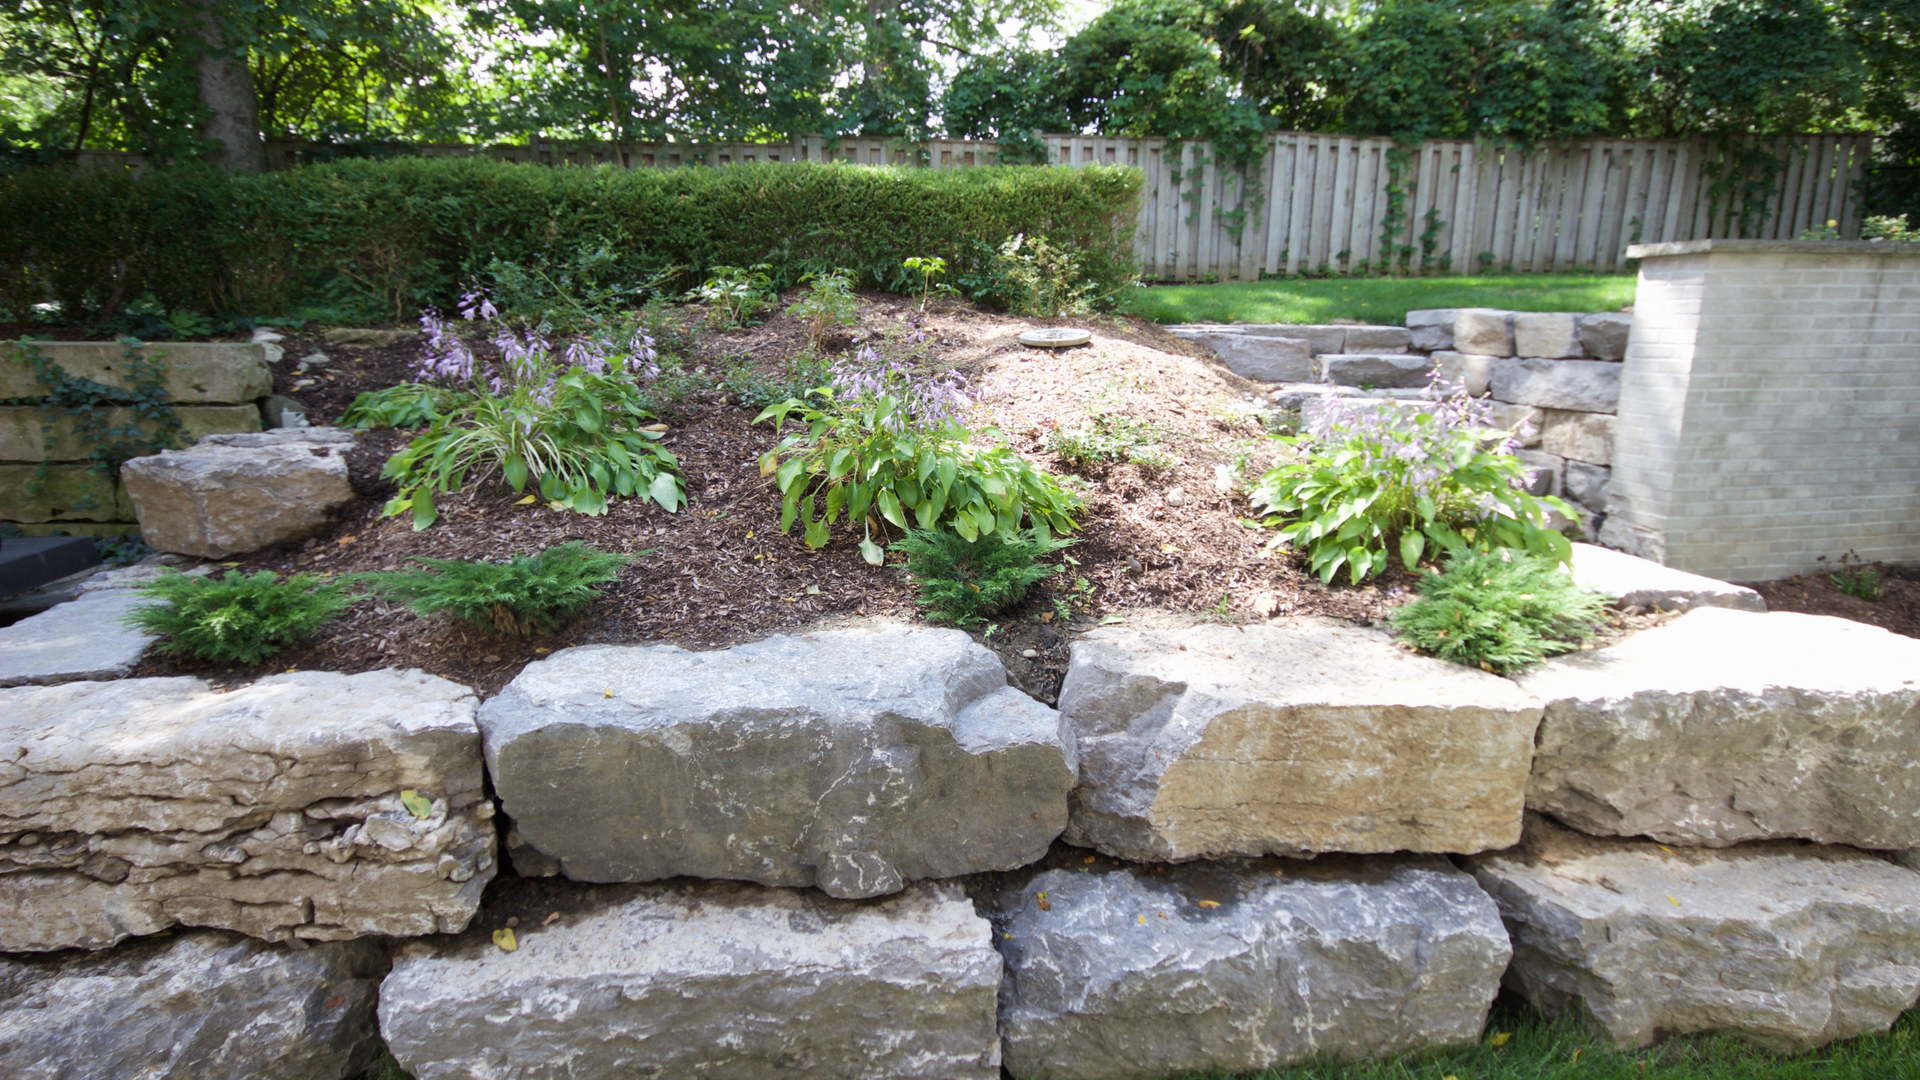 Natural garden with large armour stone retaining wall, various hostas and pine mulch. Traditional landscaping / hardscaping project in London Ontario.